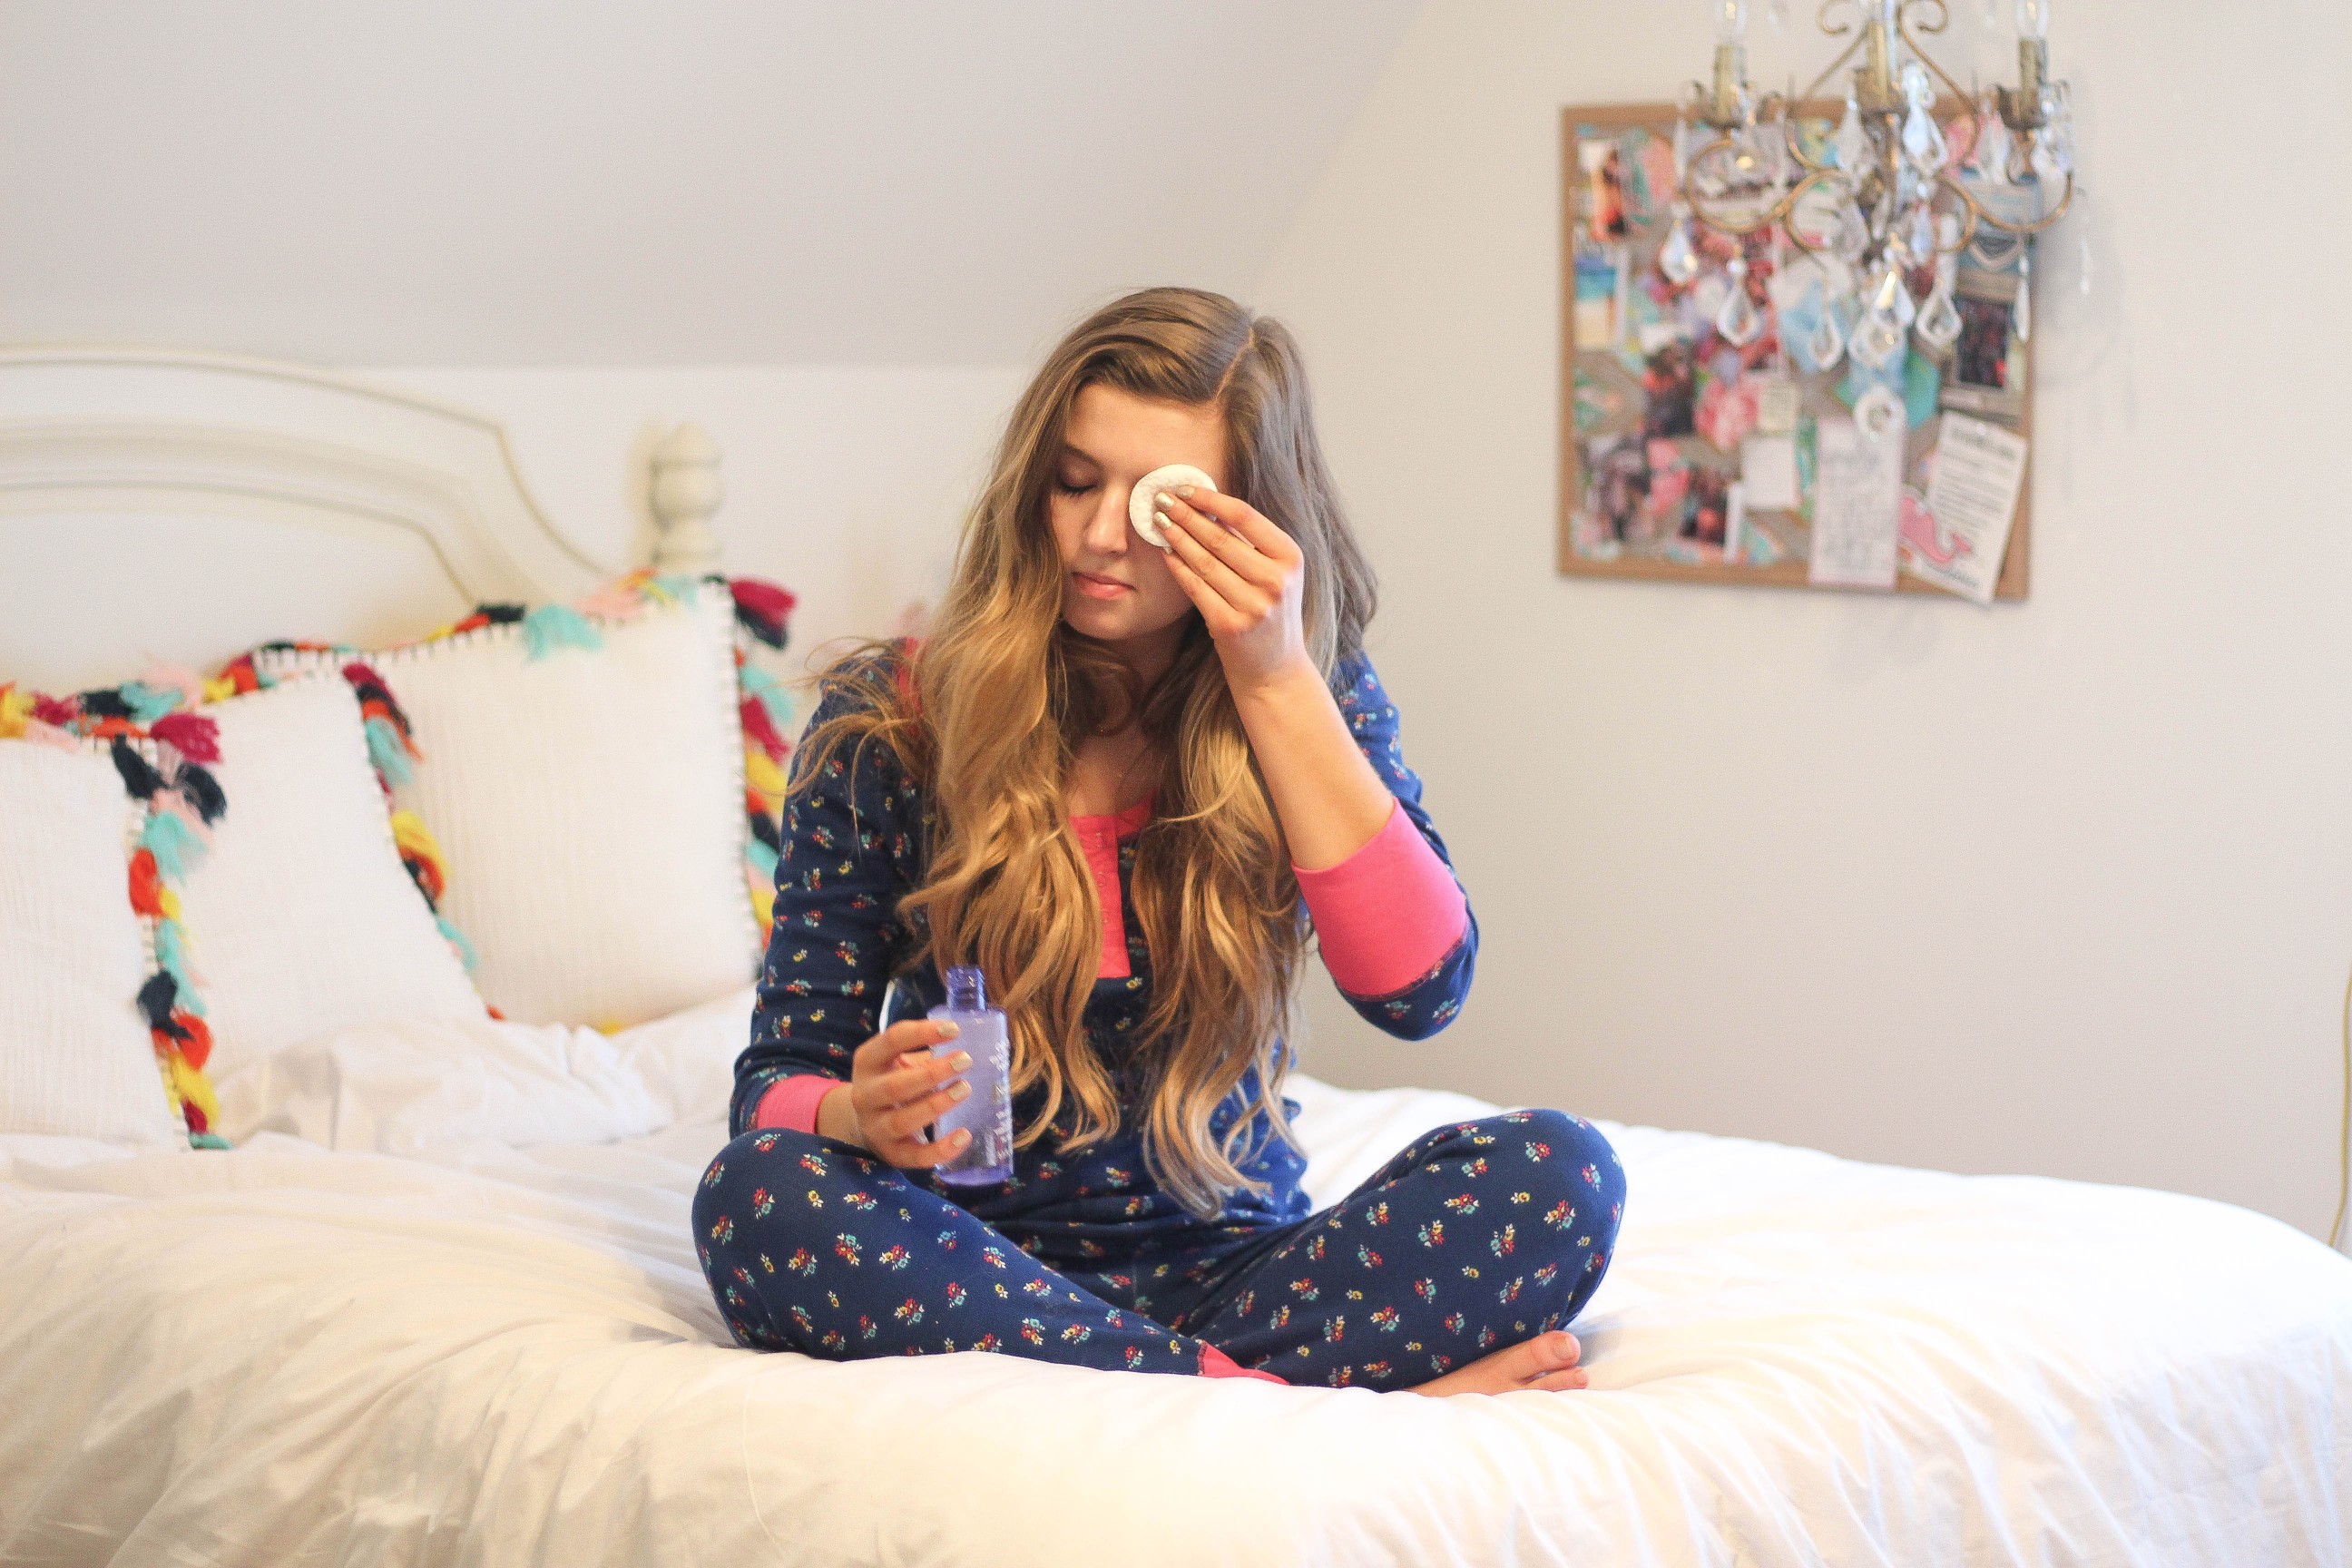 Neutrogena Light Therapy Acne Mask DIY at home facial with Neutrogena by Lauren Lindmark on Daily Dose of Charm